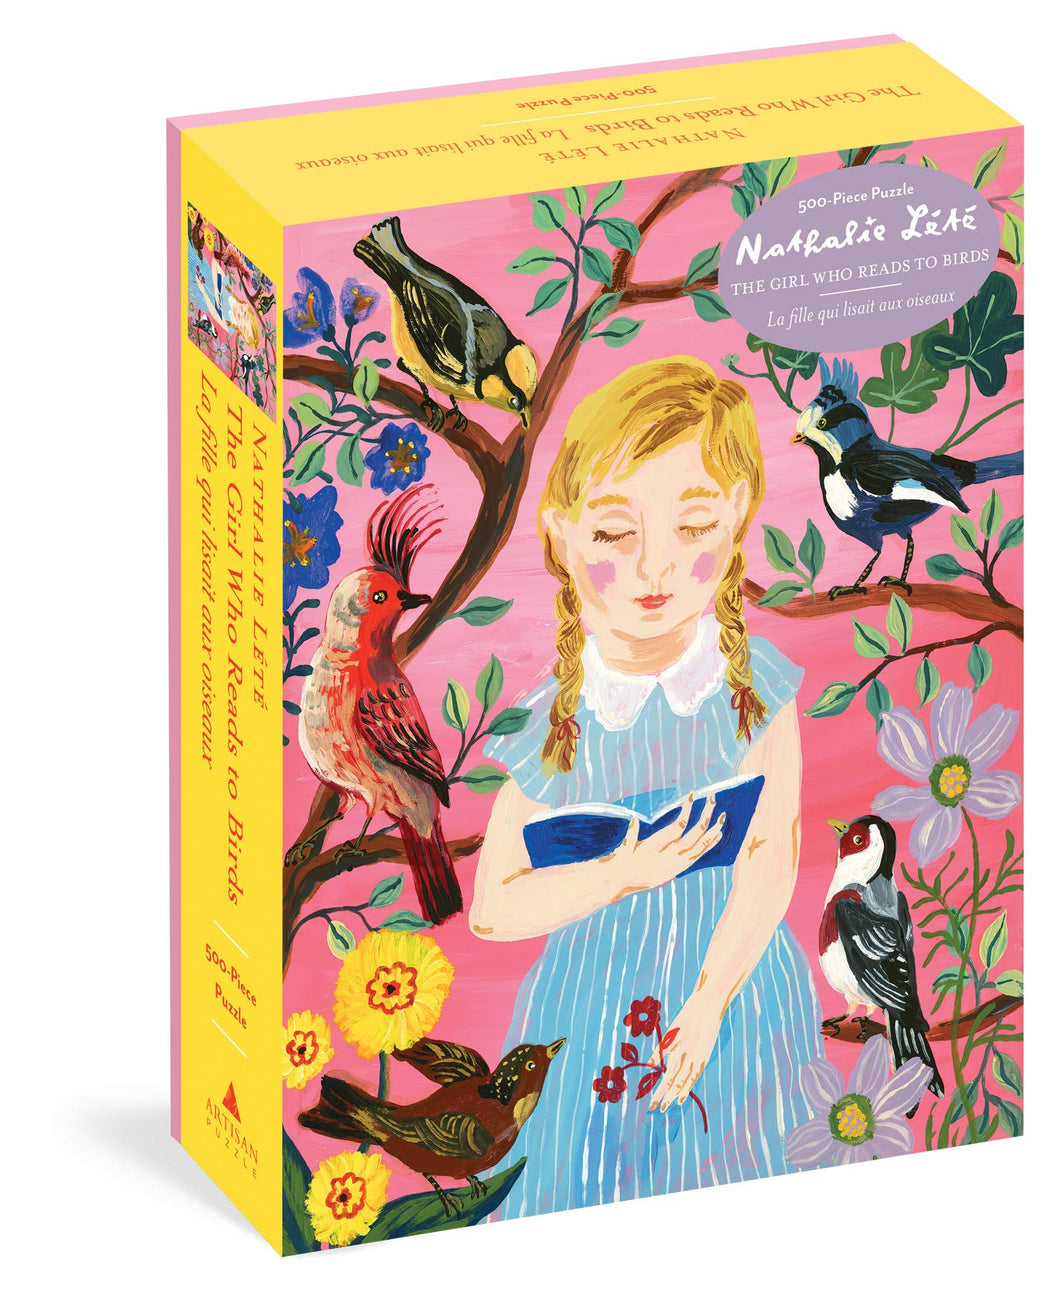 The Girl Who Reads to Birds Puzzle